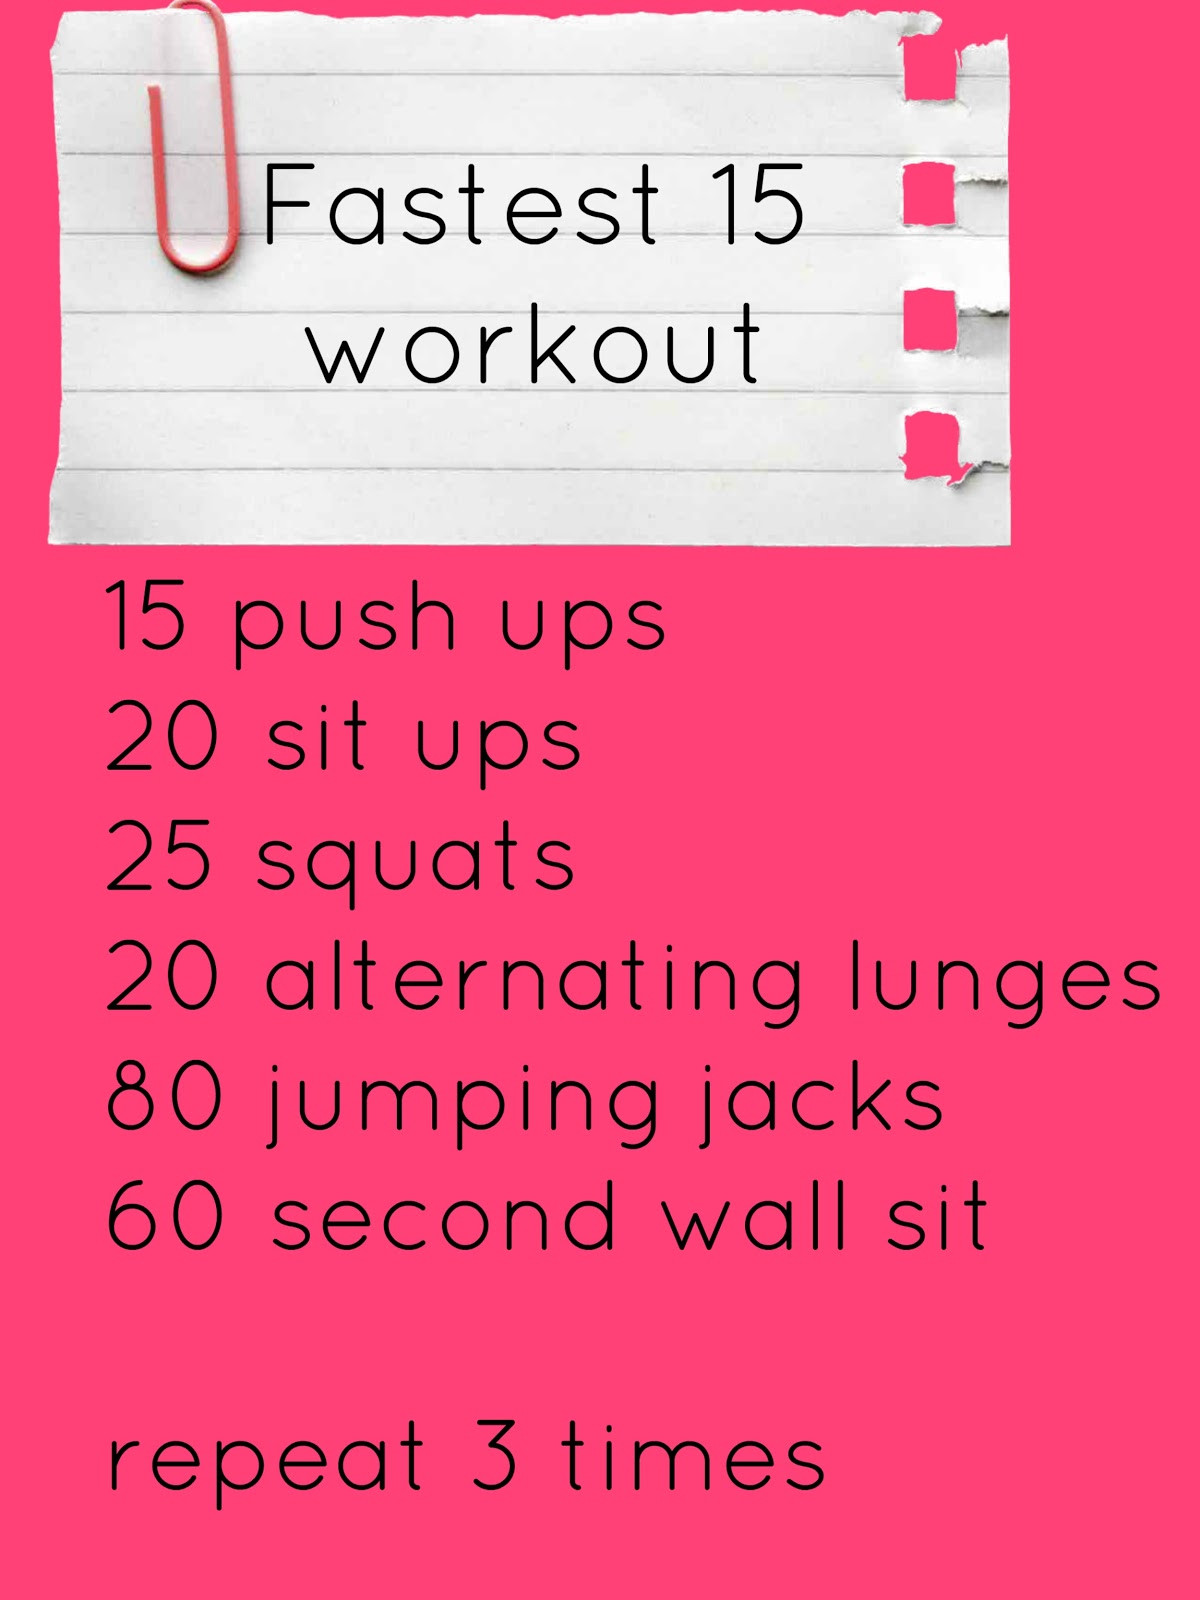 Weight Loss Exercises At Home Fast
 Fastest 15 workout